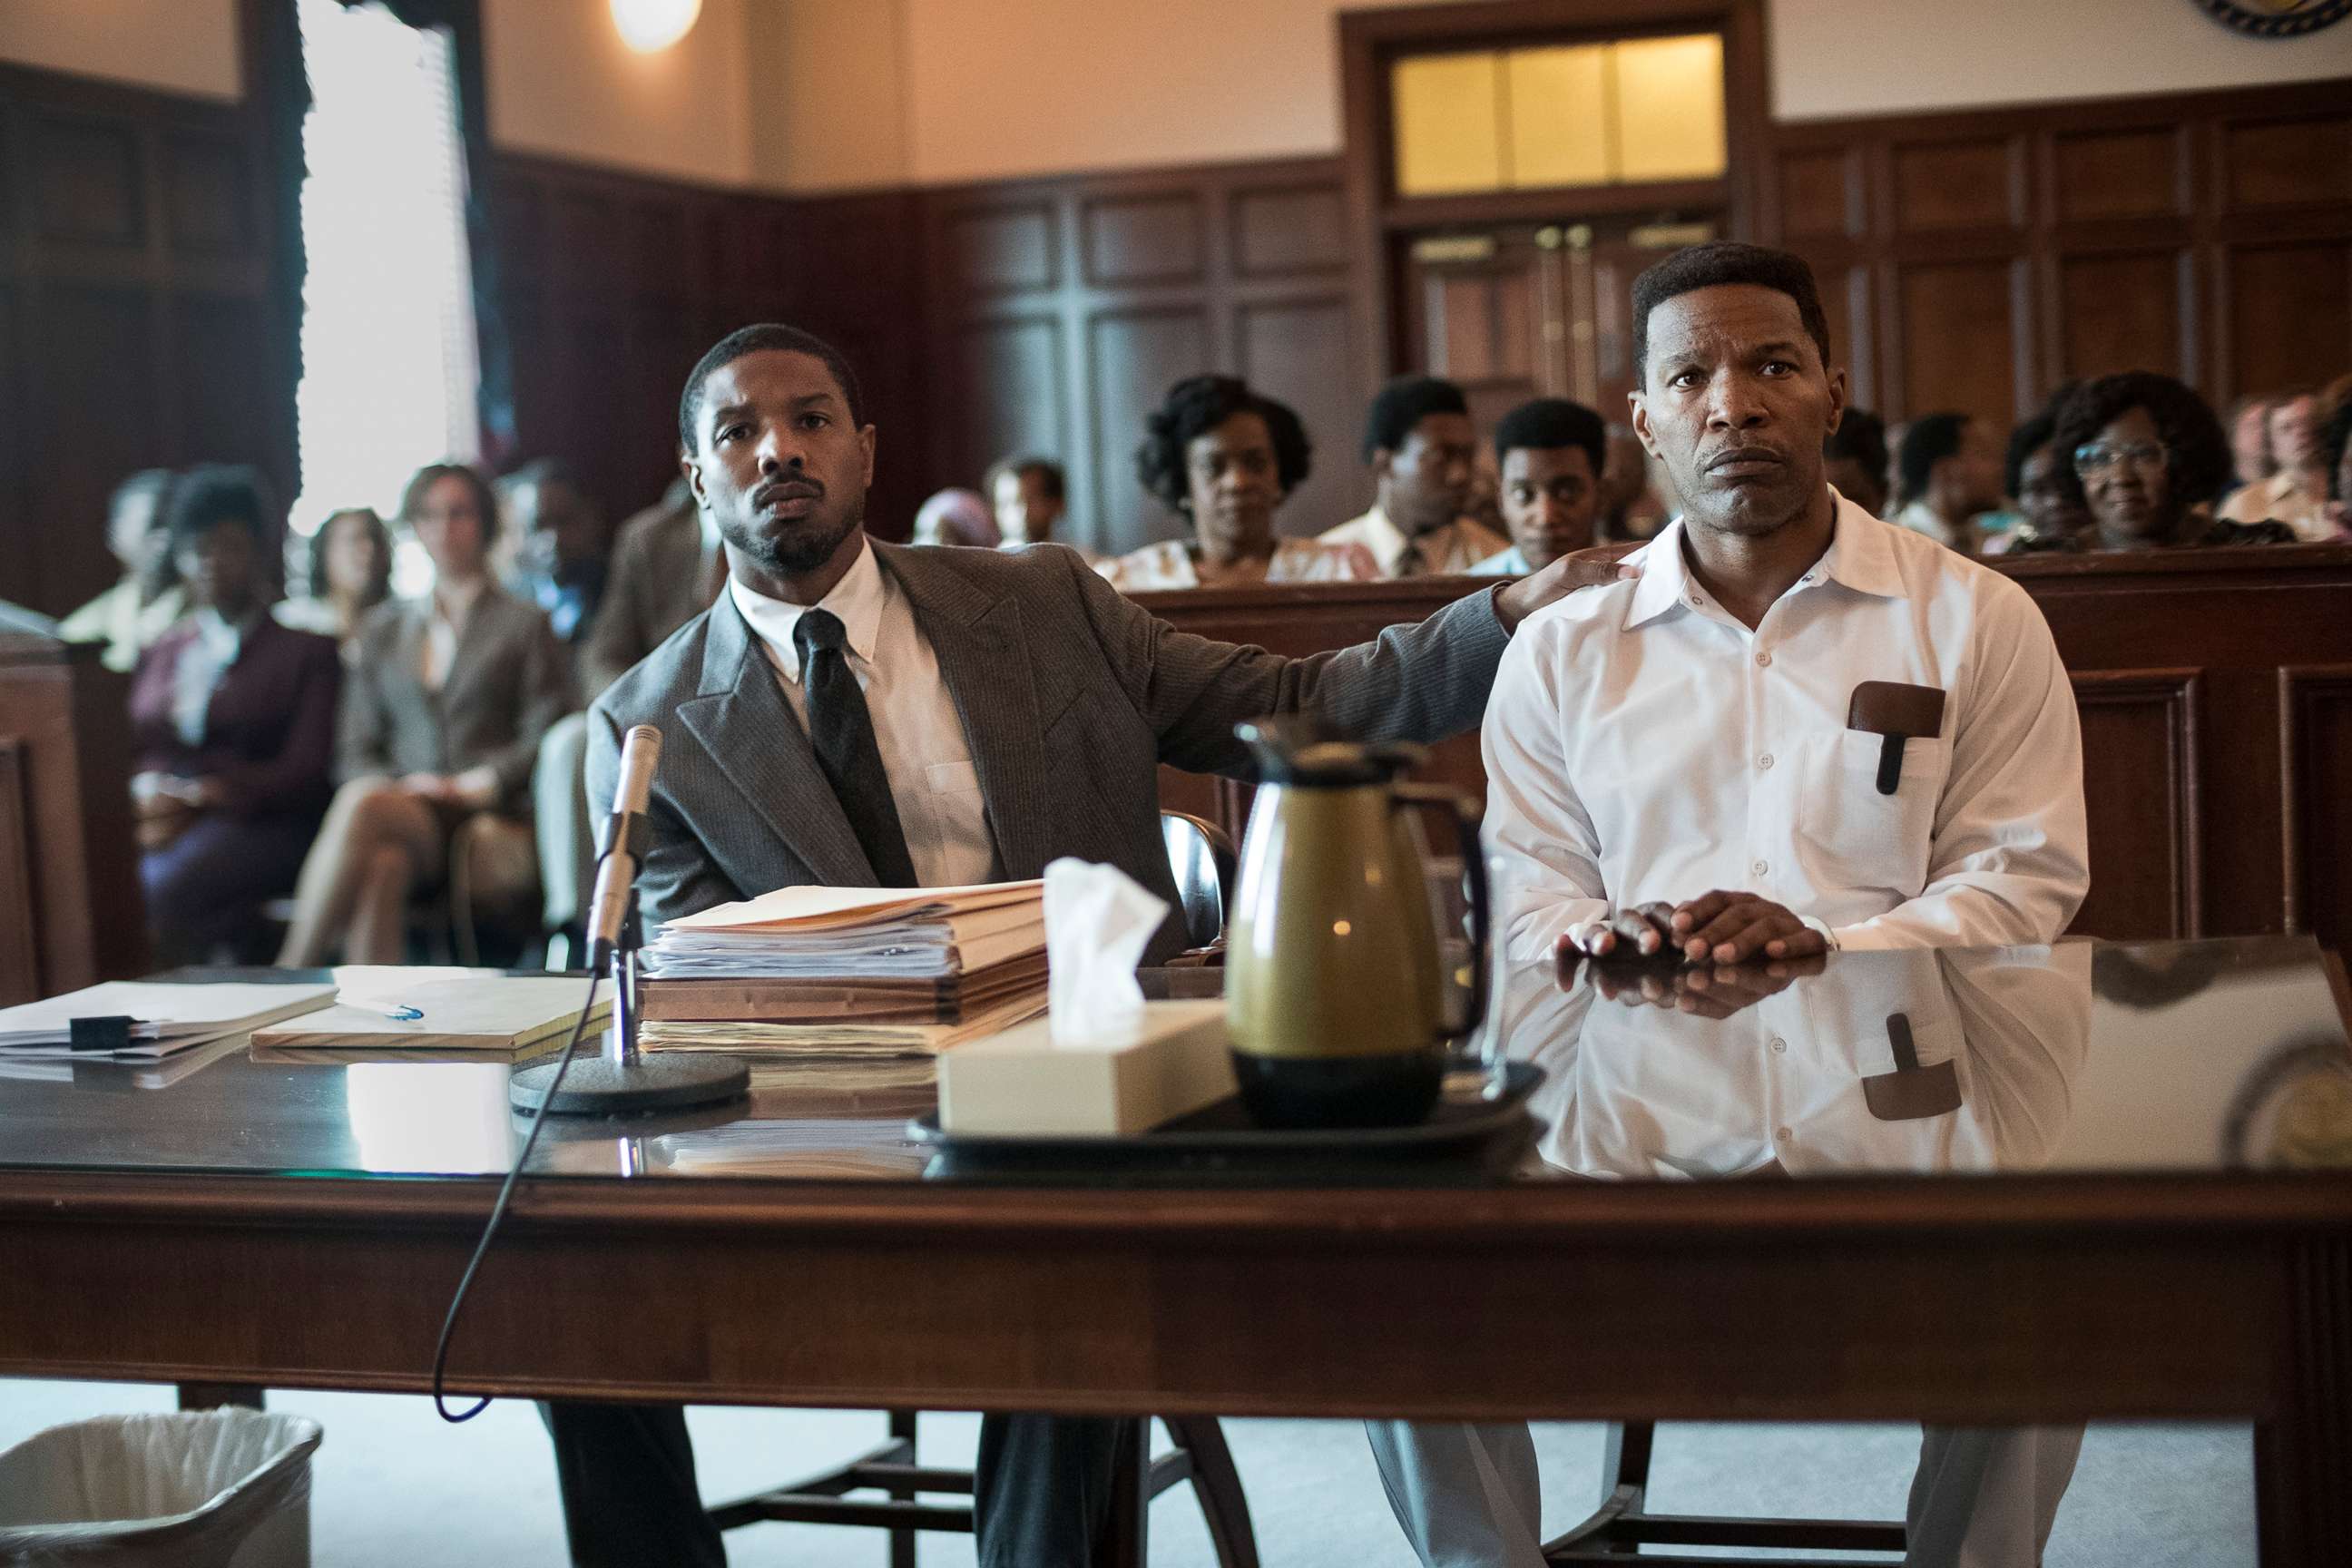 PHOTO: Michael B. Jordan as Bryan Stevenson and Jamie Foxx as Walter McMillian in a scene from the movie "Just Mercy."